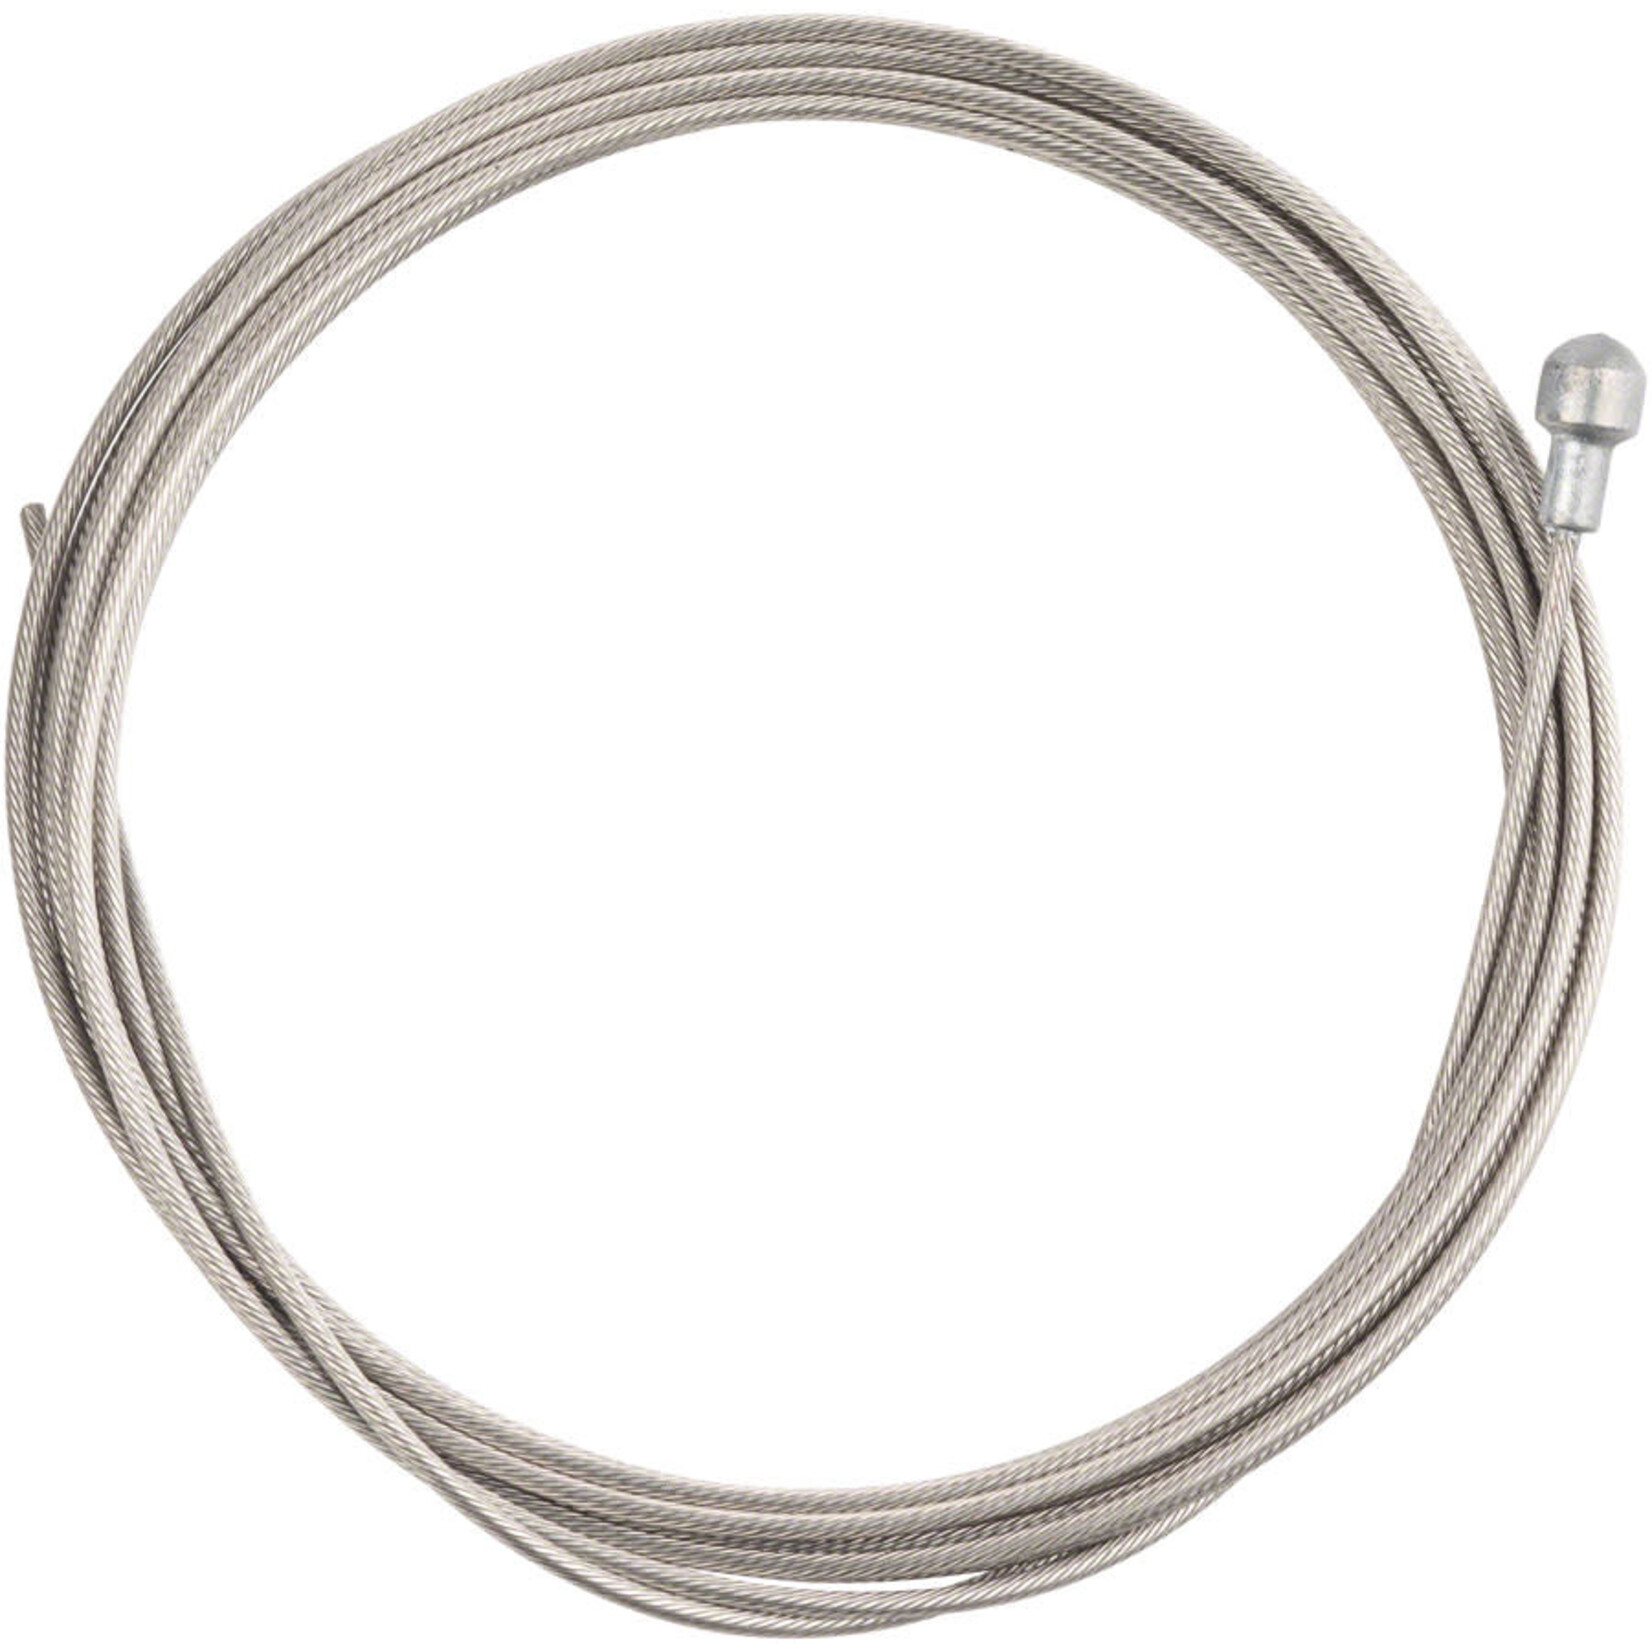 Sram Stainless, Brake Cable, 1.5mm, 2750mm, Road, Unit